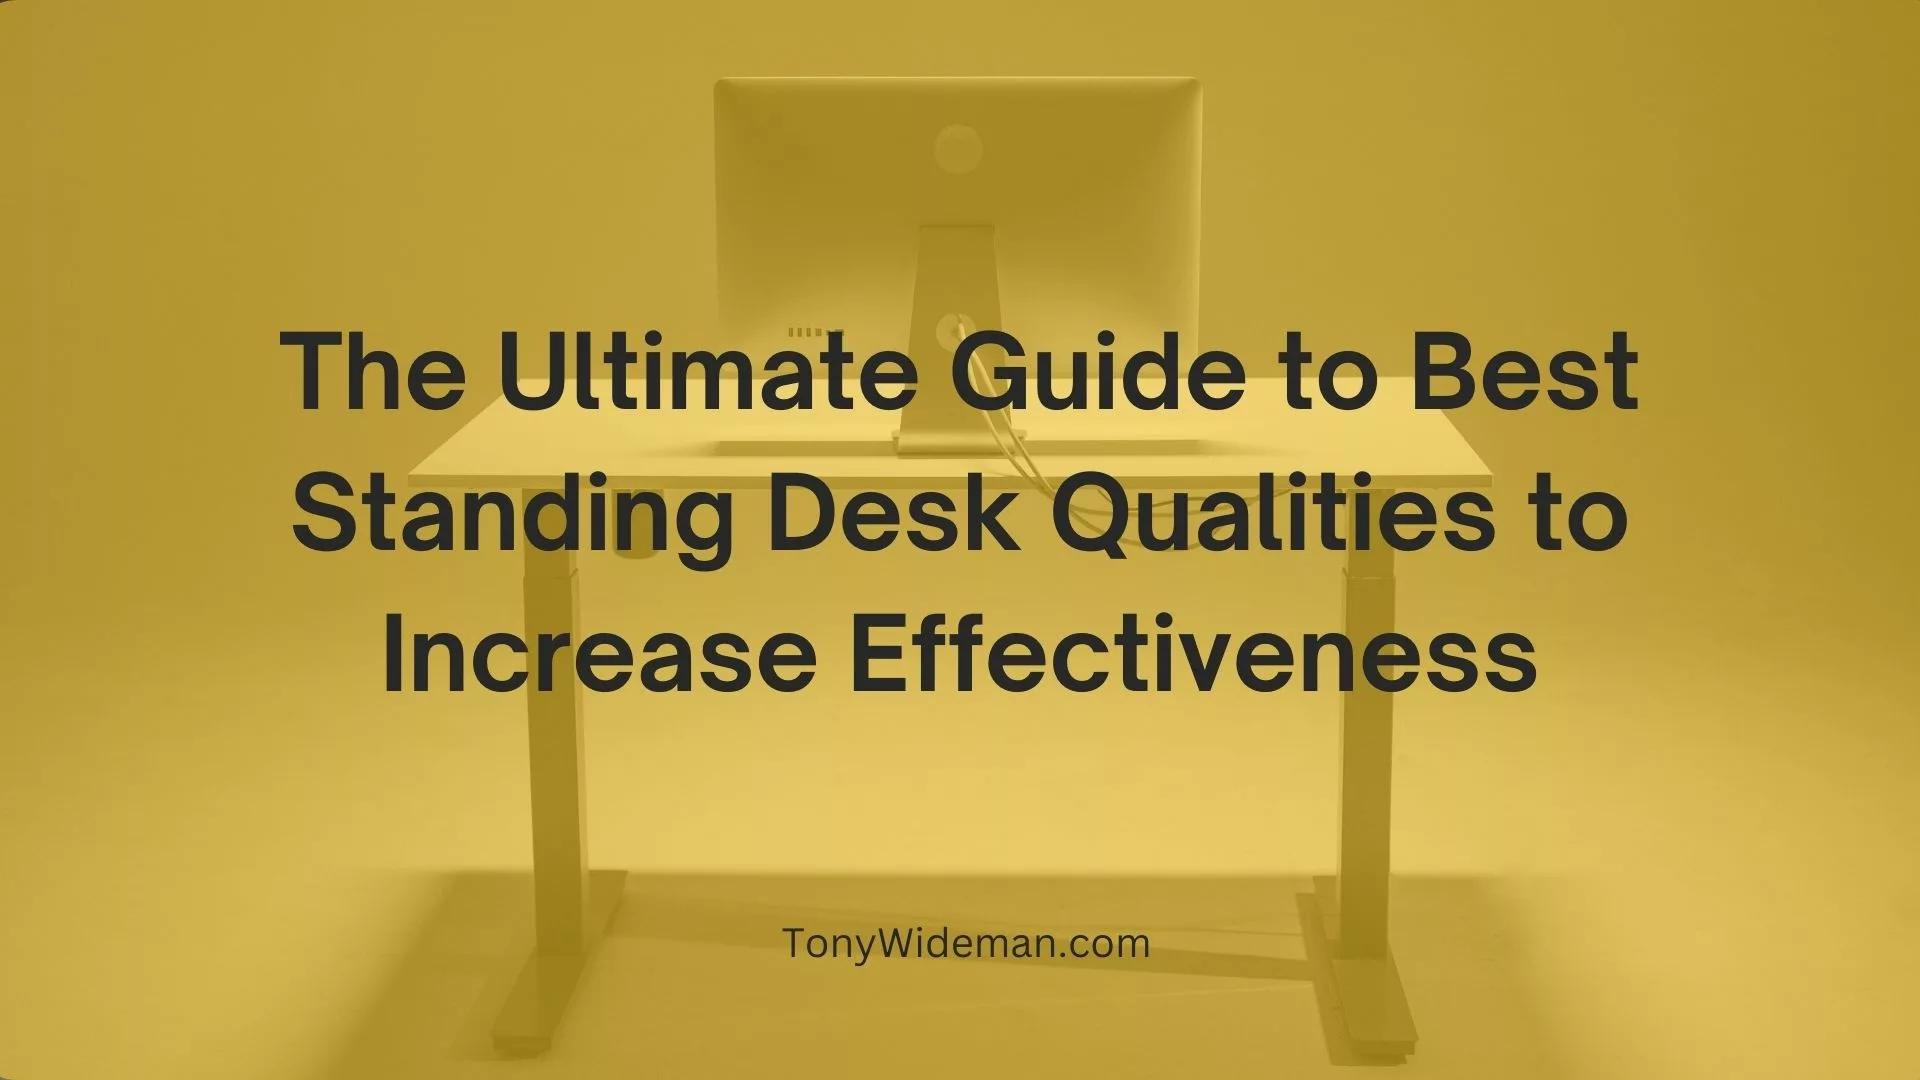 Guide to Best Standing Desk Qualities to Increase Effectiveness